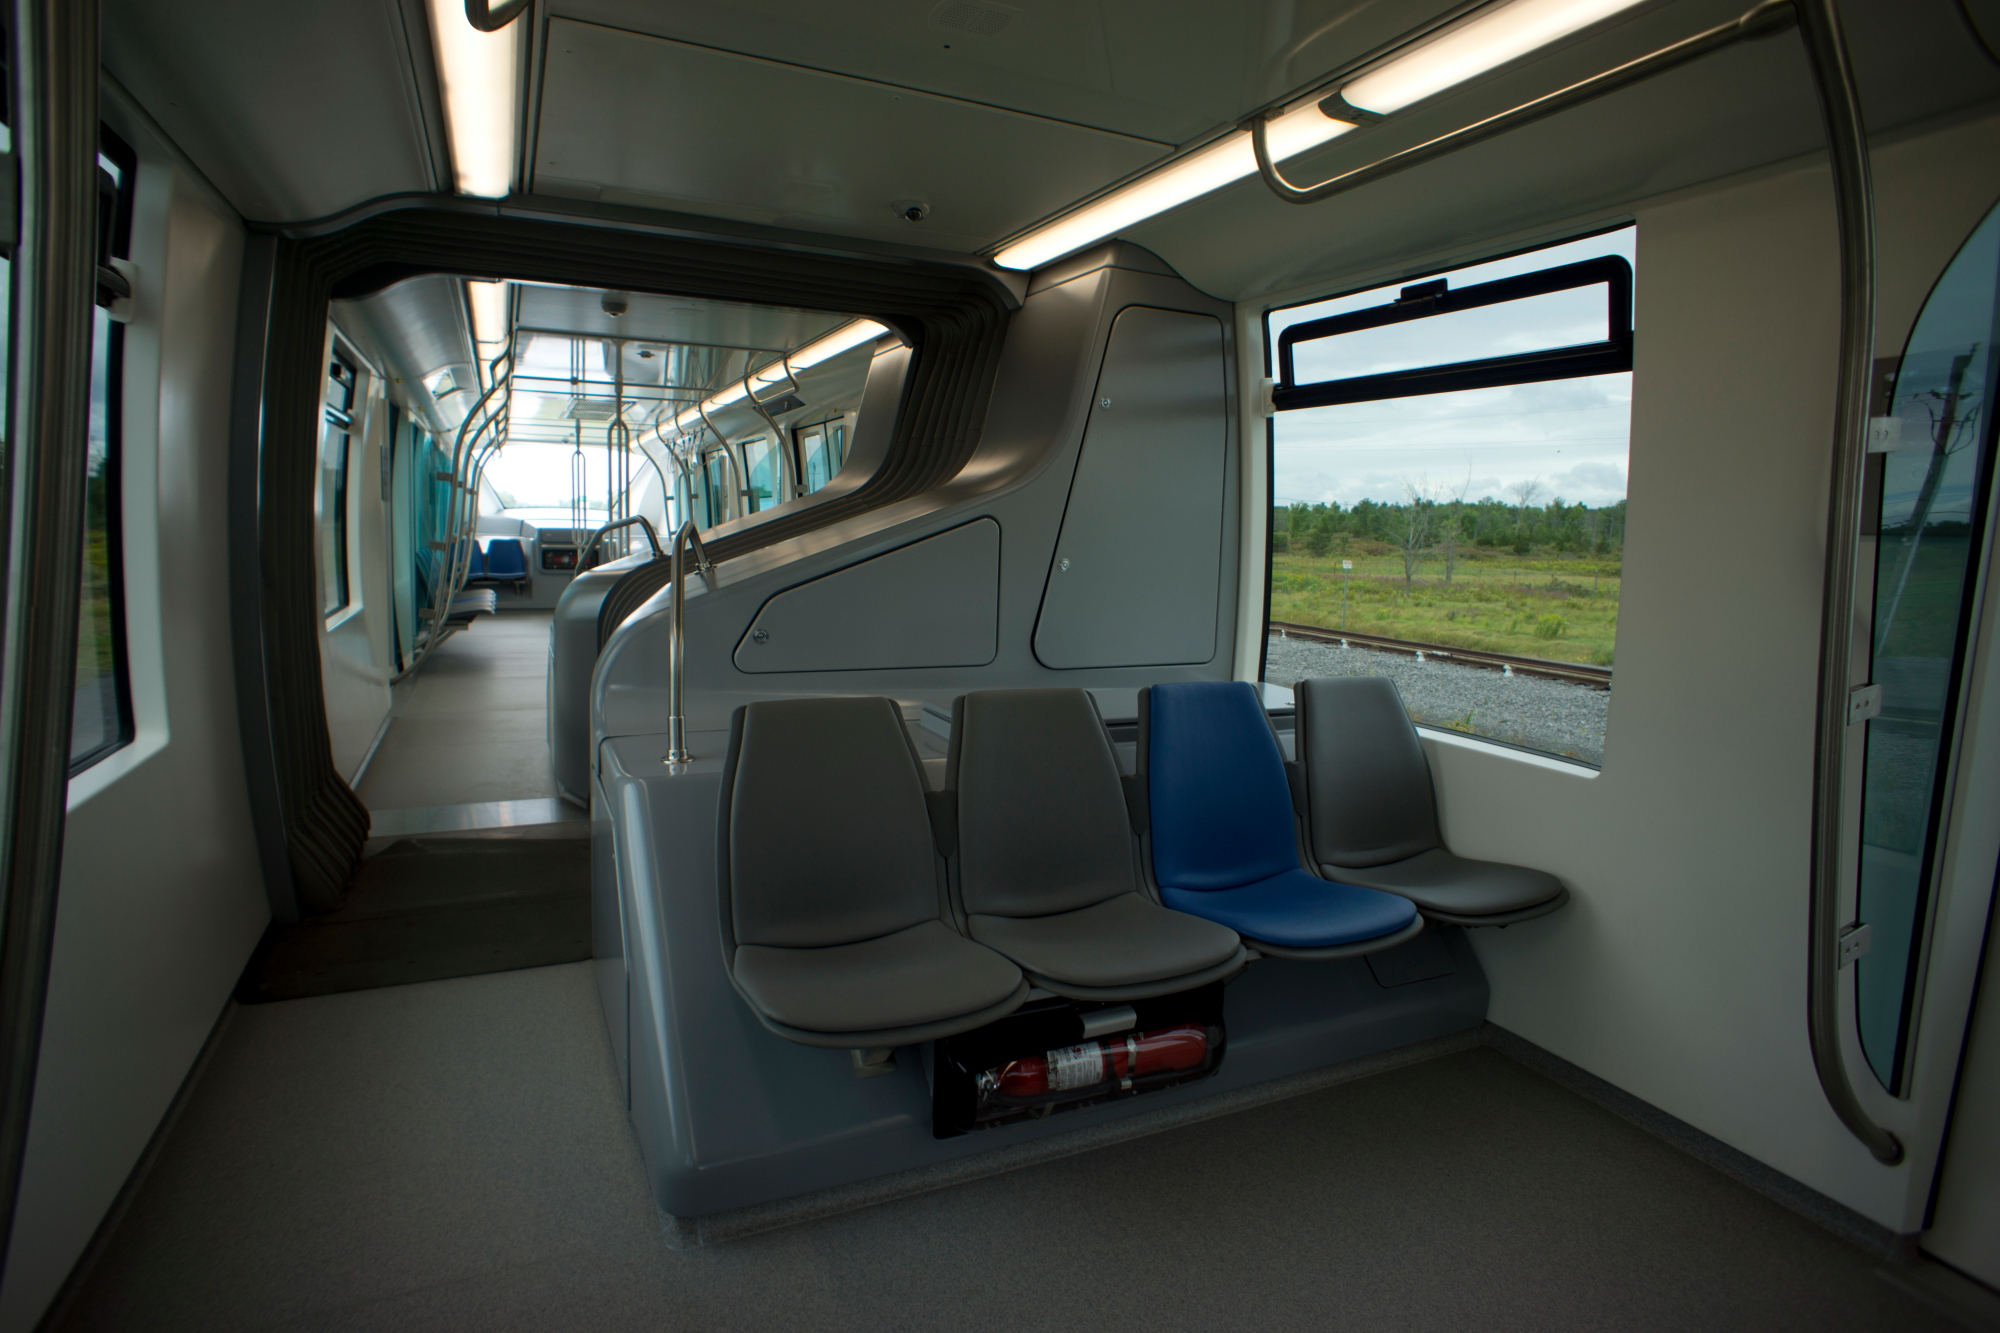 Bombardier has won two contracts for its driverless Innovia Monorail 300 system for two mass rapid transit lines in Bangkok, Thailand. The contract with NBM concerns the new 34.5 km Khae Rai-MinBuri (Pink) Line to operate with 42 trainsets. For EBM, scope comprises 30 train sets for the 30.4 km Lat Phrao-Samrong (Yellow) Line.